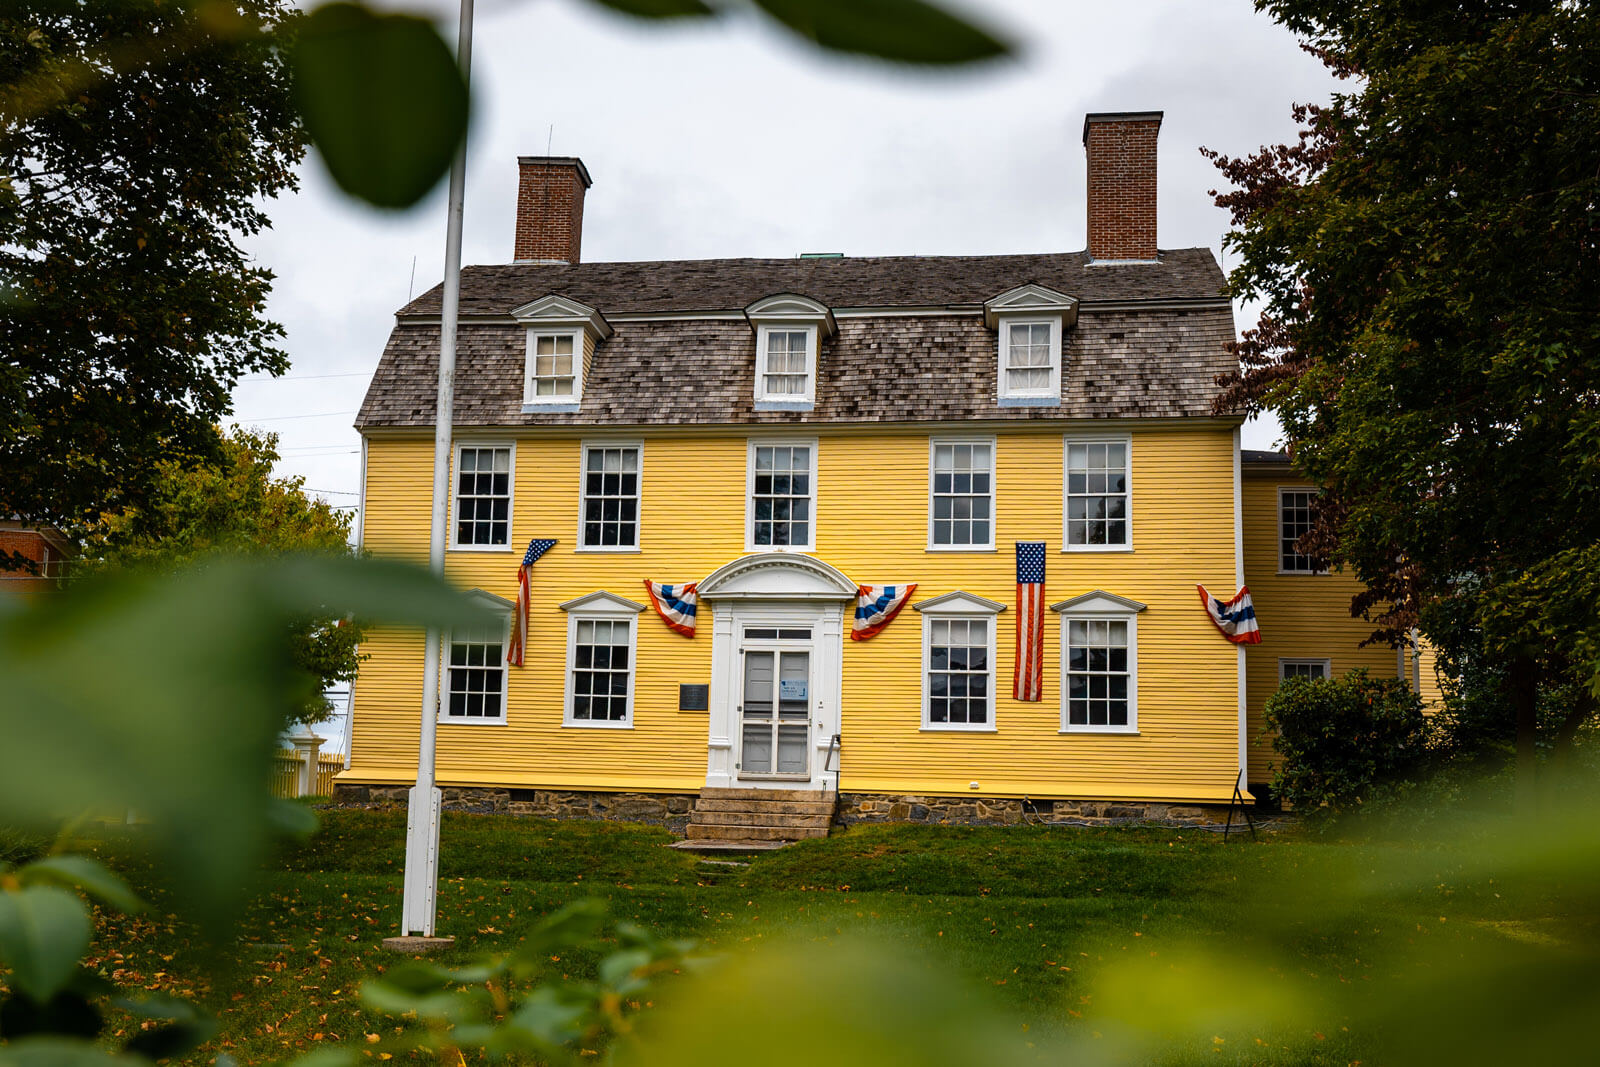 John Paul Jones House in Portsmouth New Hampshire a historic tourist attraction